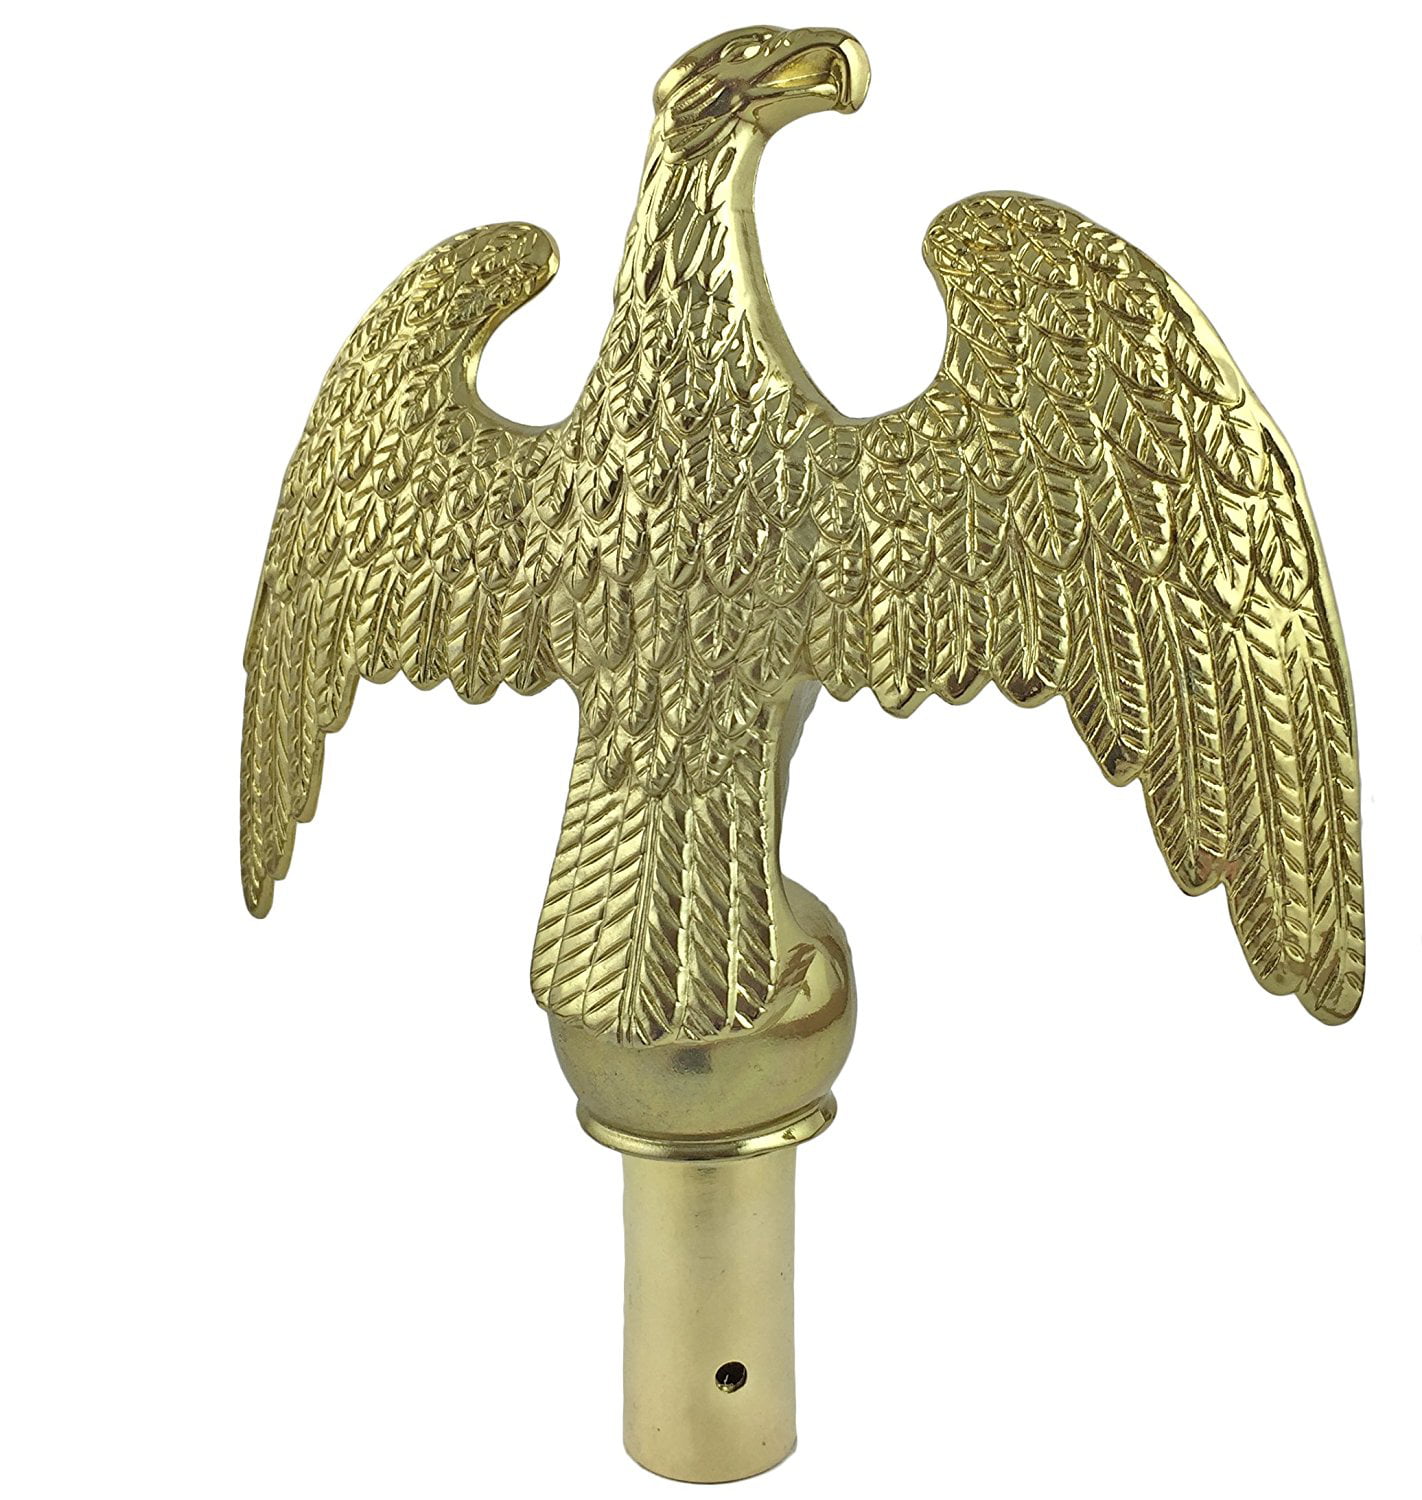 Golden Eagle Flag Pole Topper 7" wing span Flagpole Ornament 6" tall 